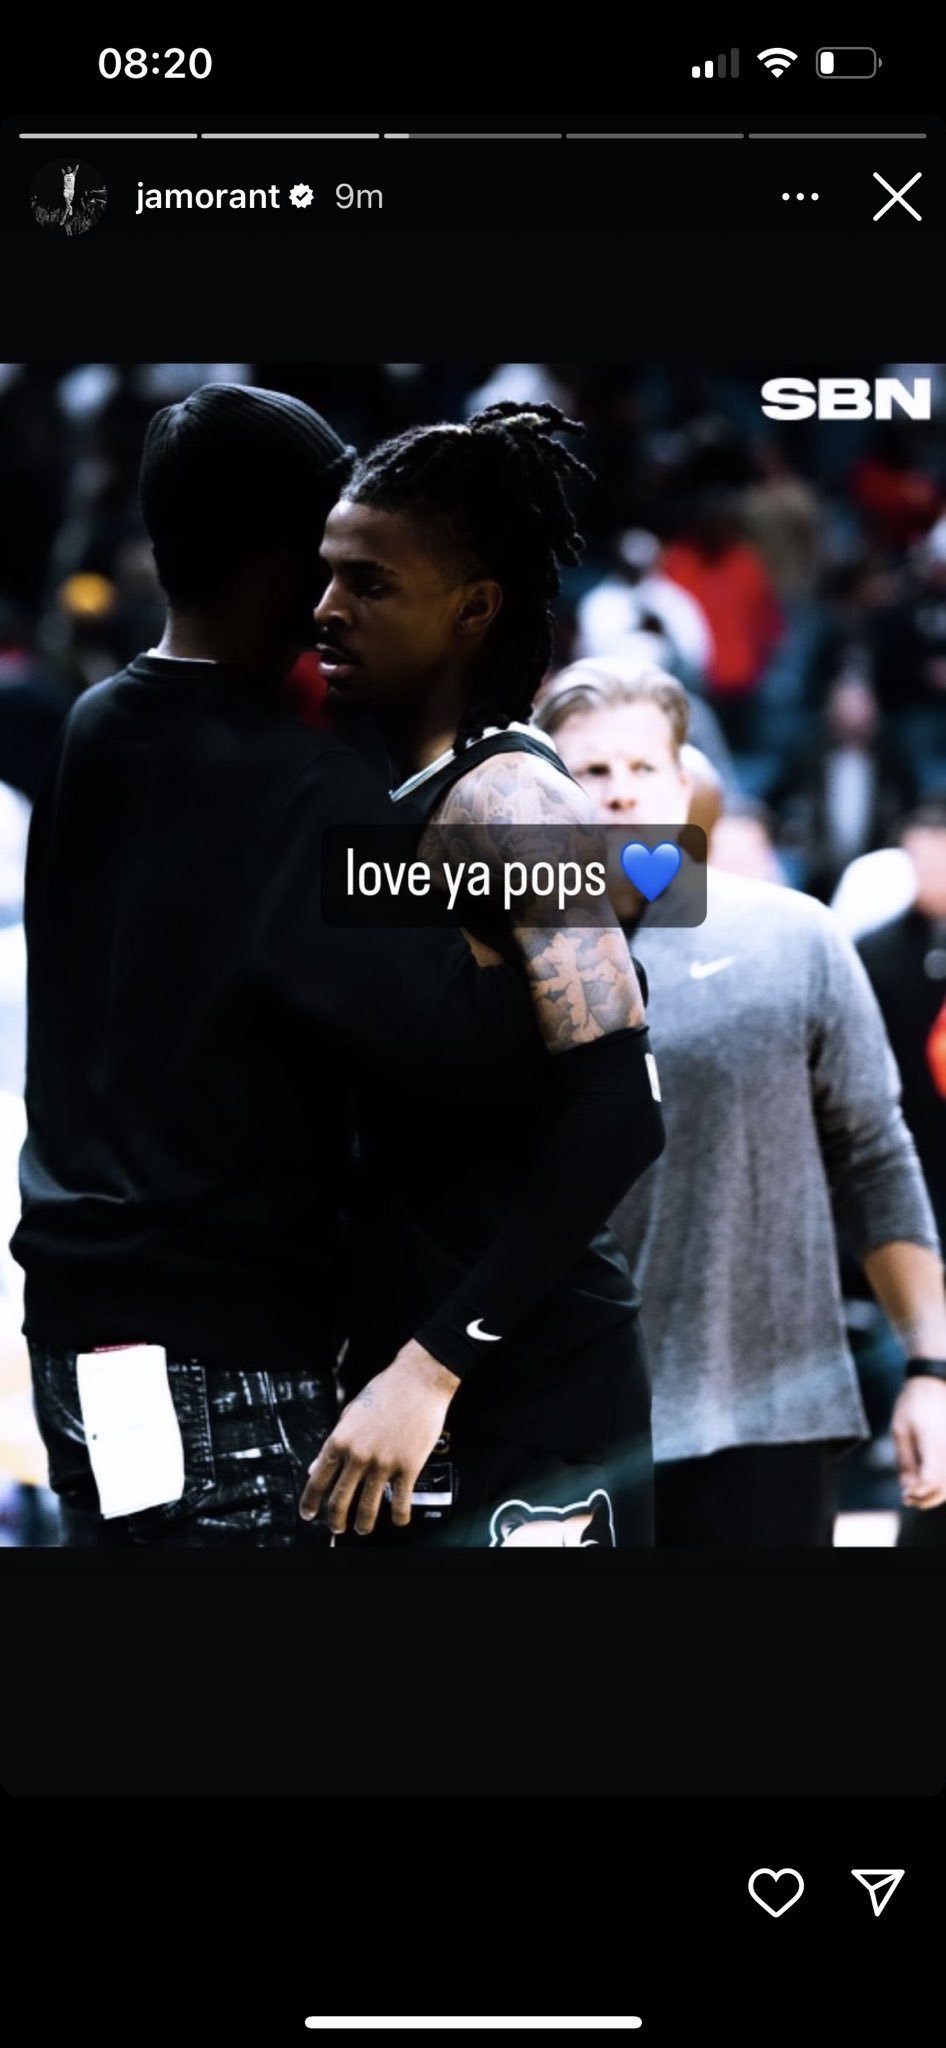 Ja Morant leaves cryptic messages on Instagram that he later deletes: Goodbye, I love you mom...